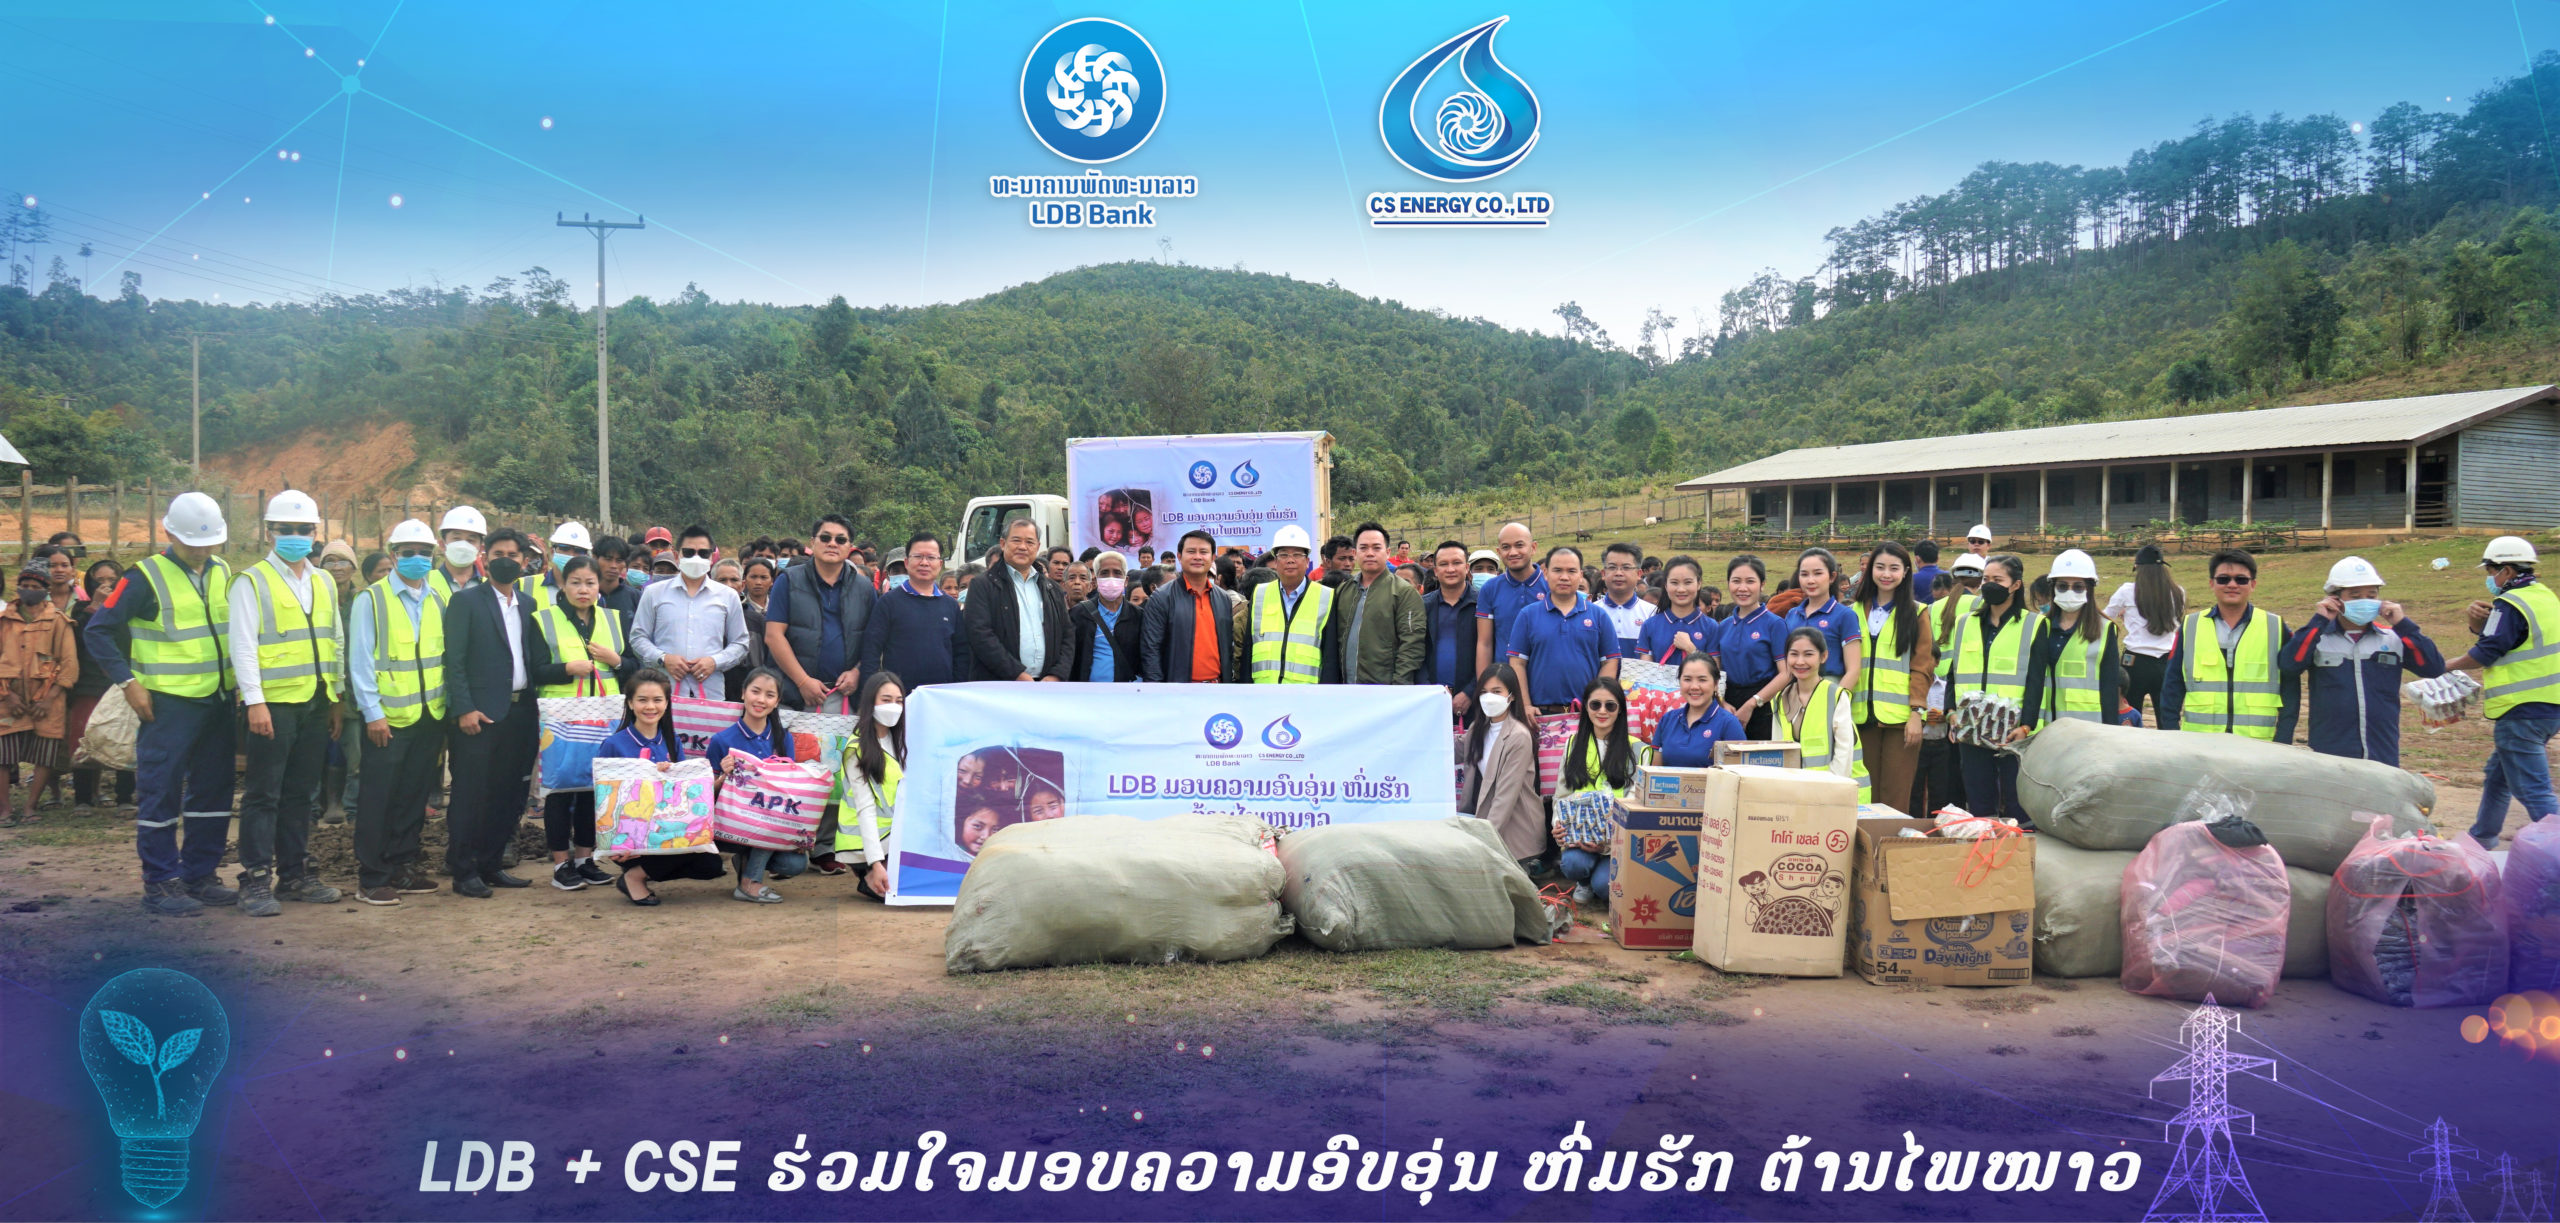 LDB+CSE organize activities together to provide warmth against relief cold disaster